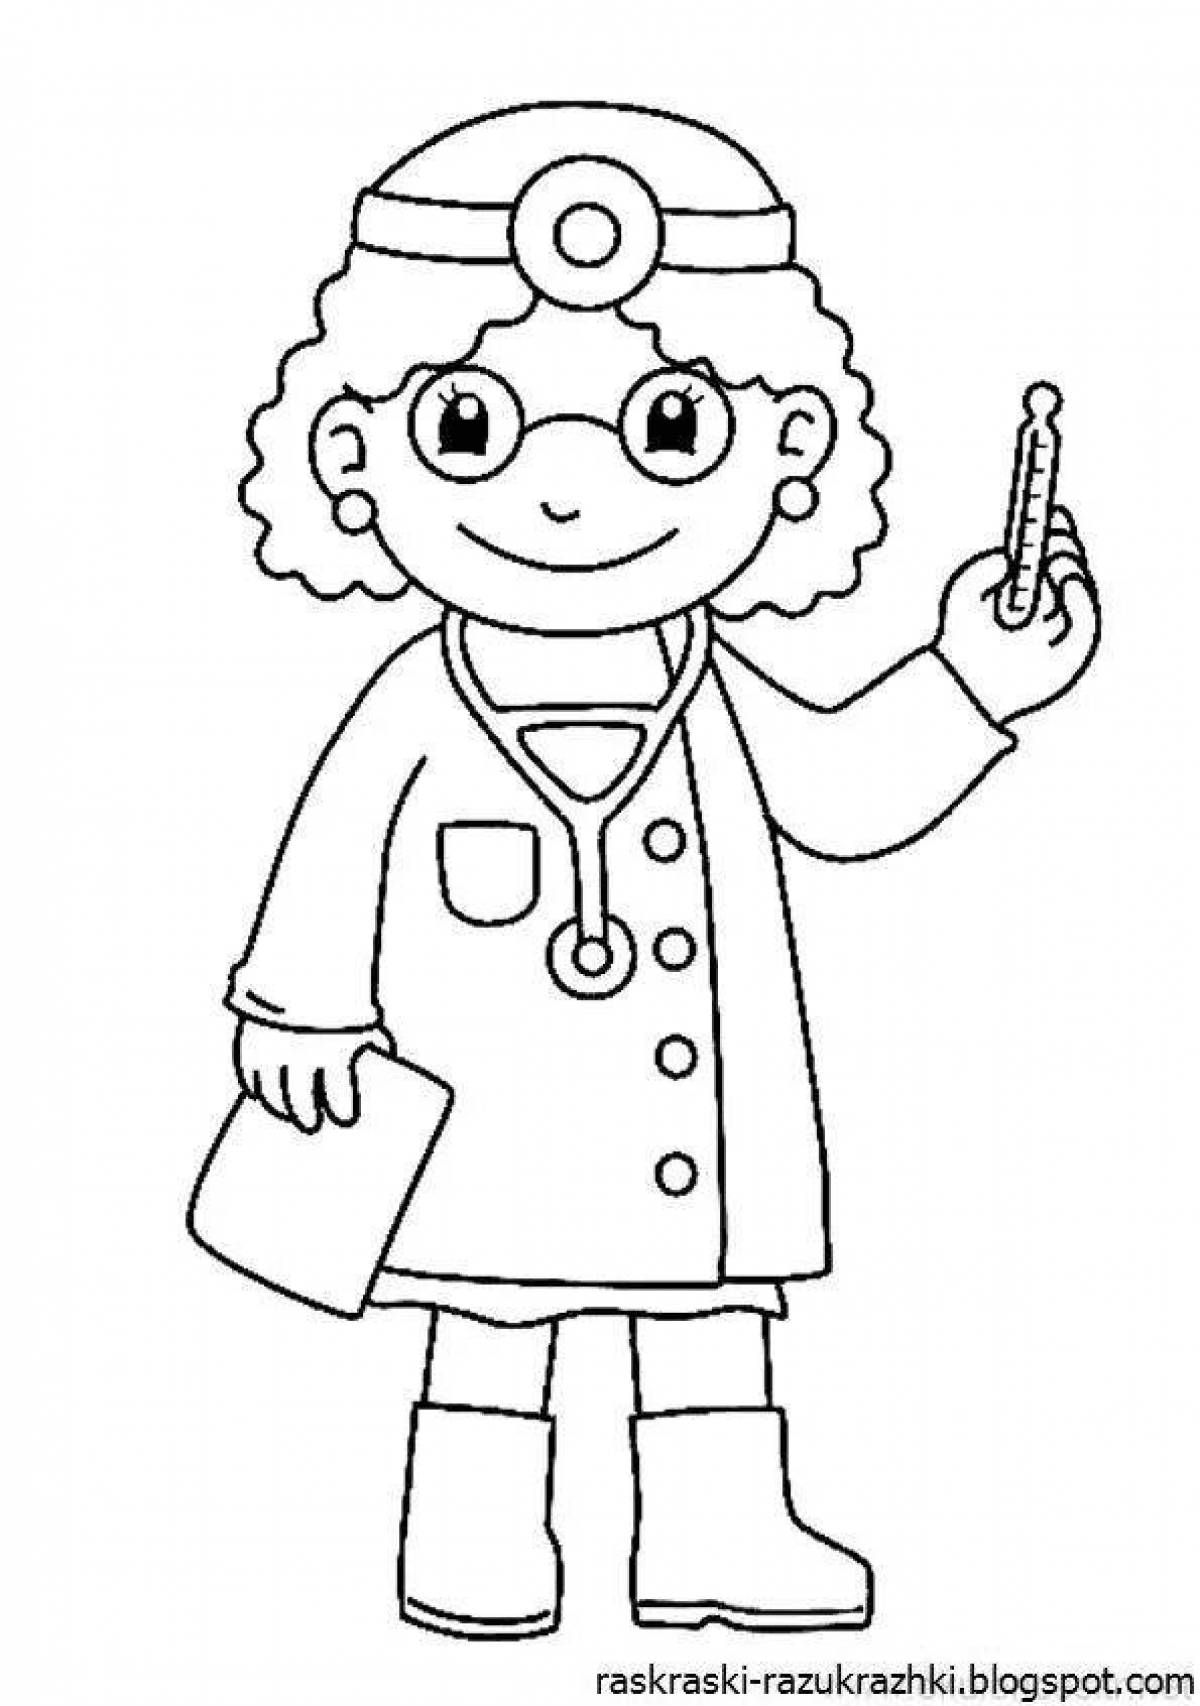 Coloring book joyful profession of a doctor